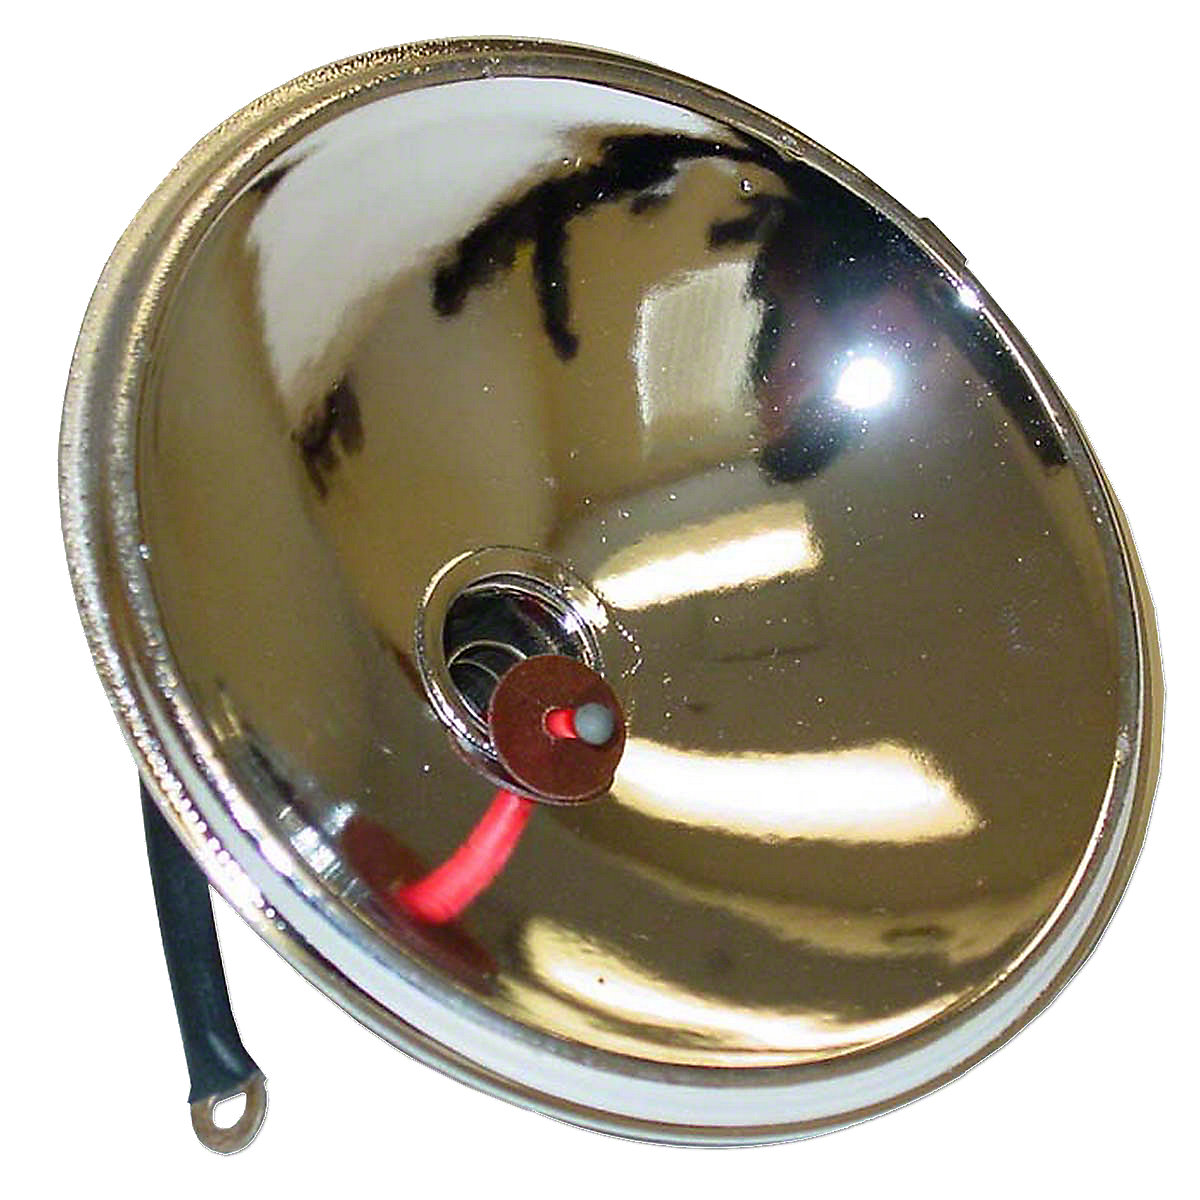 Head Light Reflector For Allis Chalmers: B, C, CA, D10, D12, D14, D15 (up To Sn 9001), RC, WC, WD, WD45, WF.